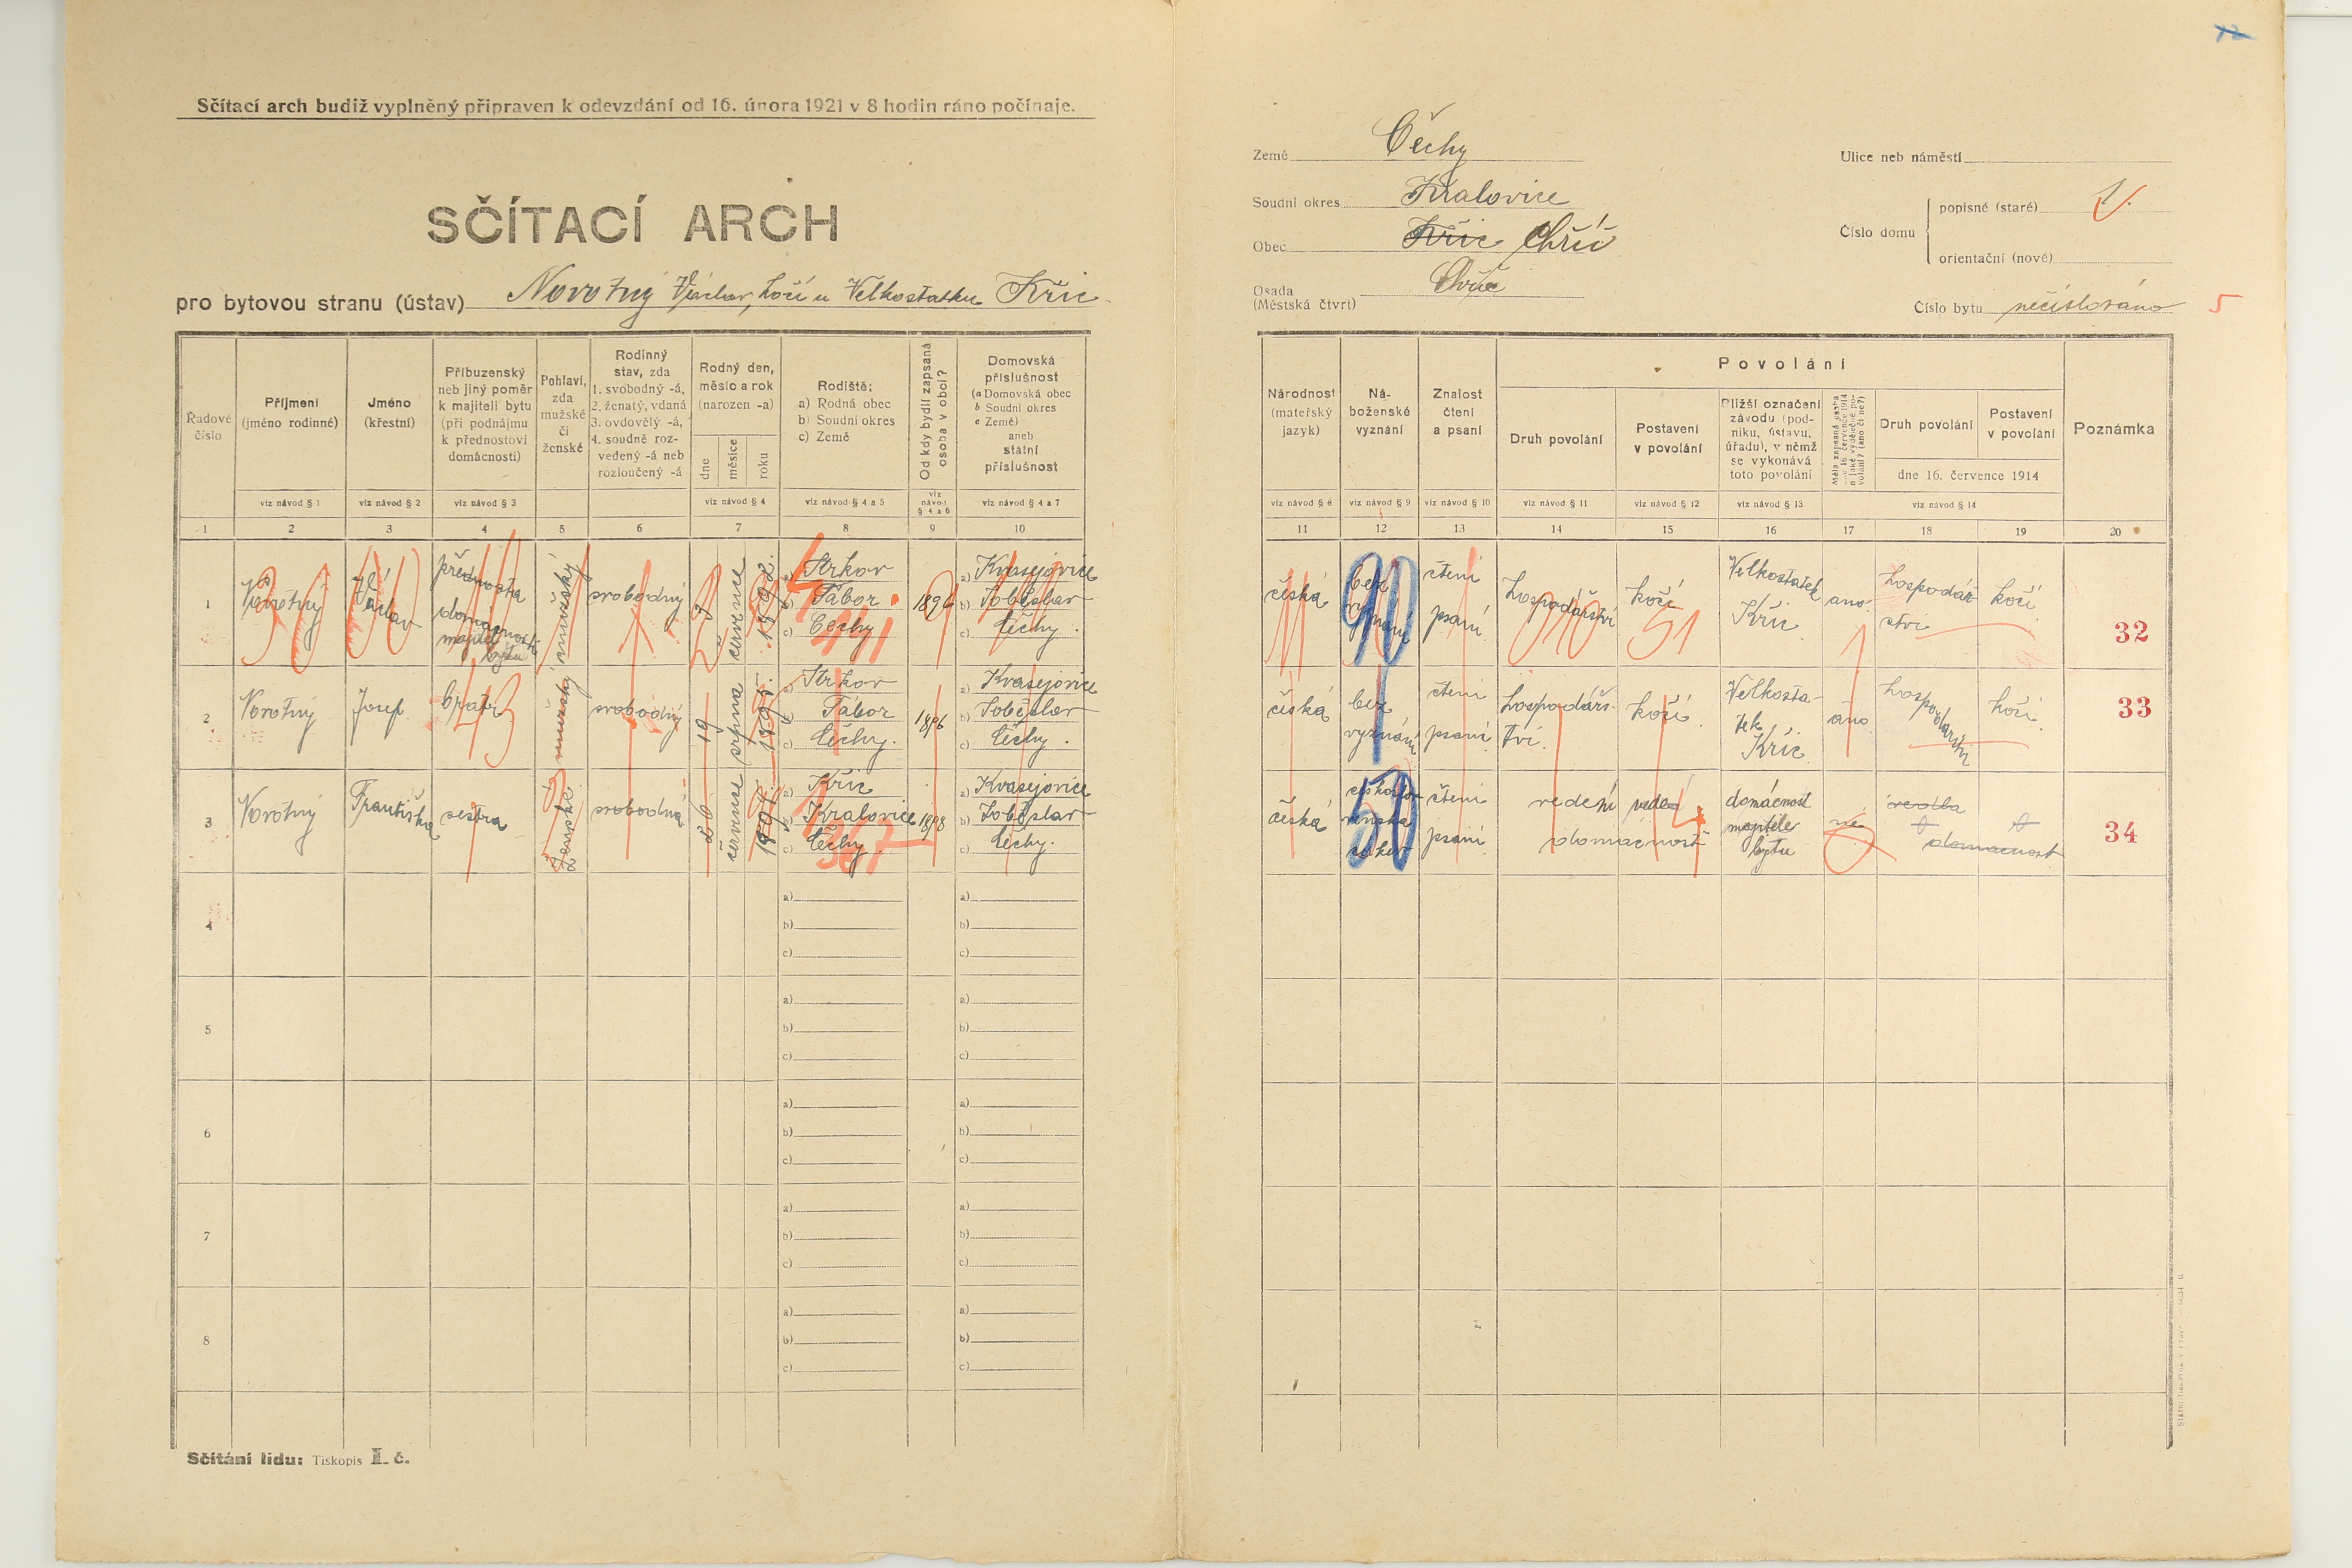 10. soap-ps_00423_census-1921-chric-cp001_0100